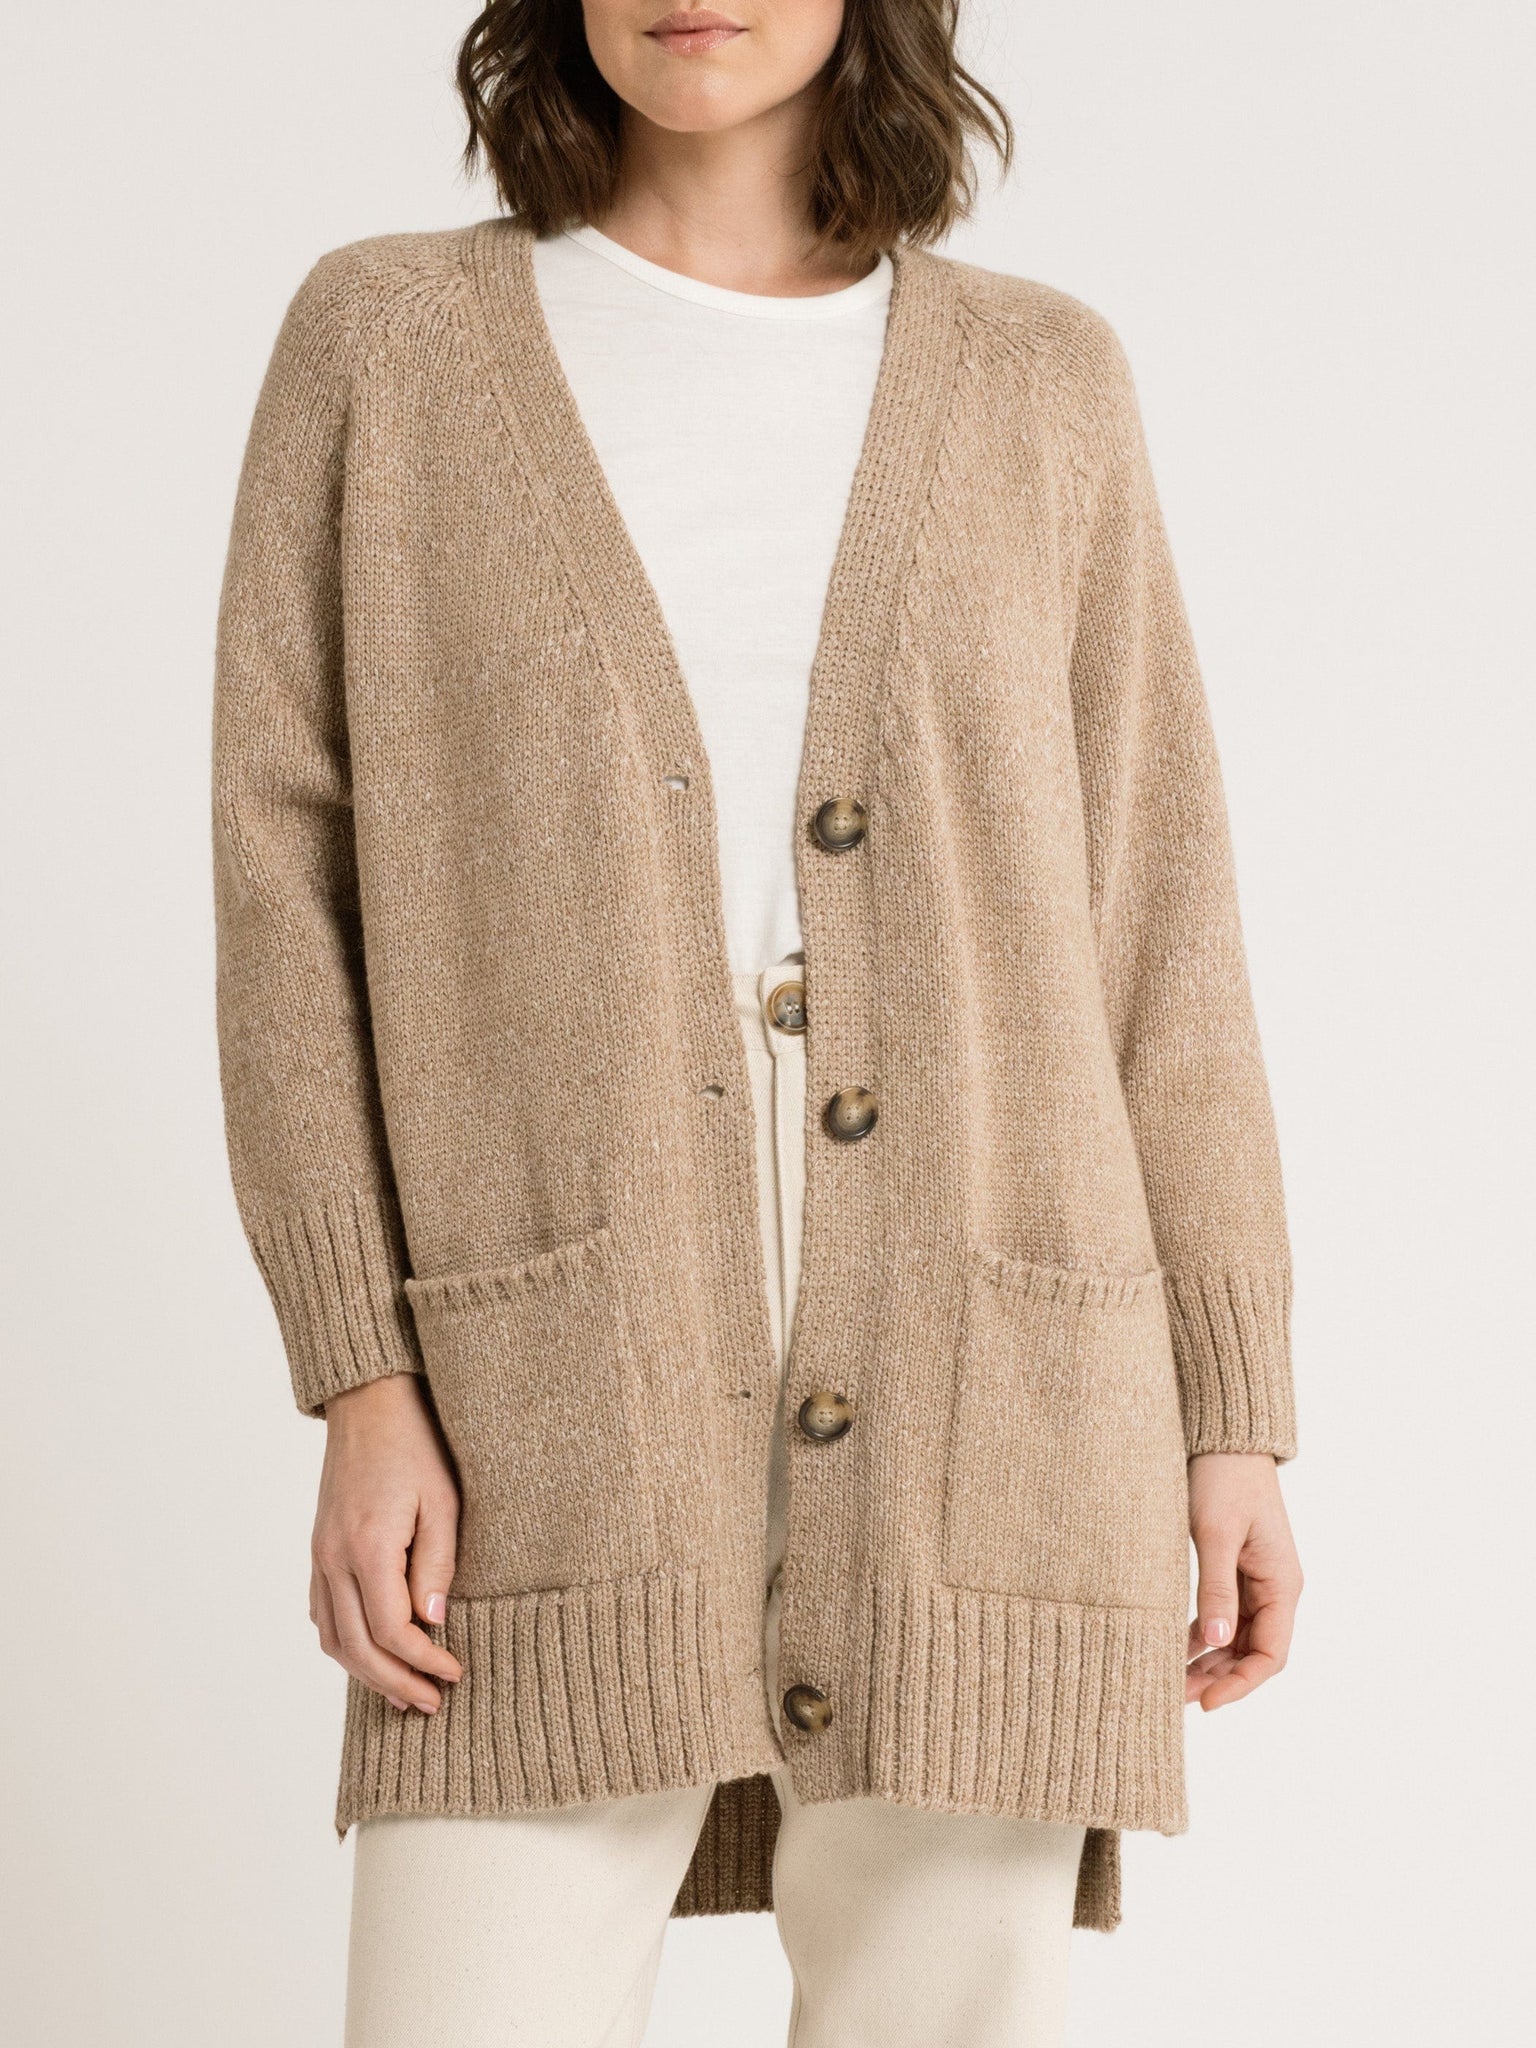 A Valley Cardigan - Caramel with buttons.